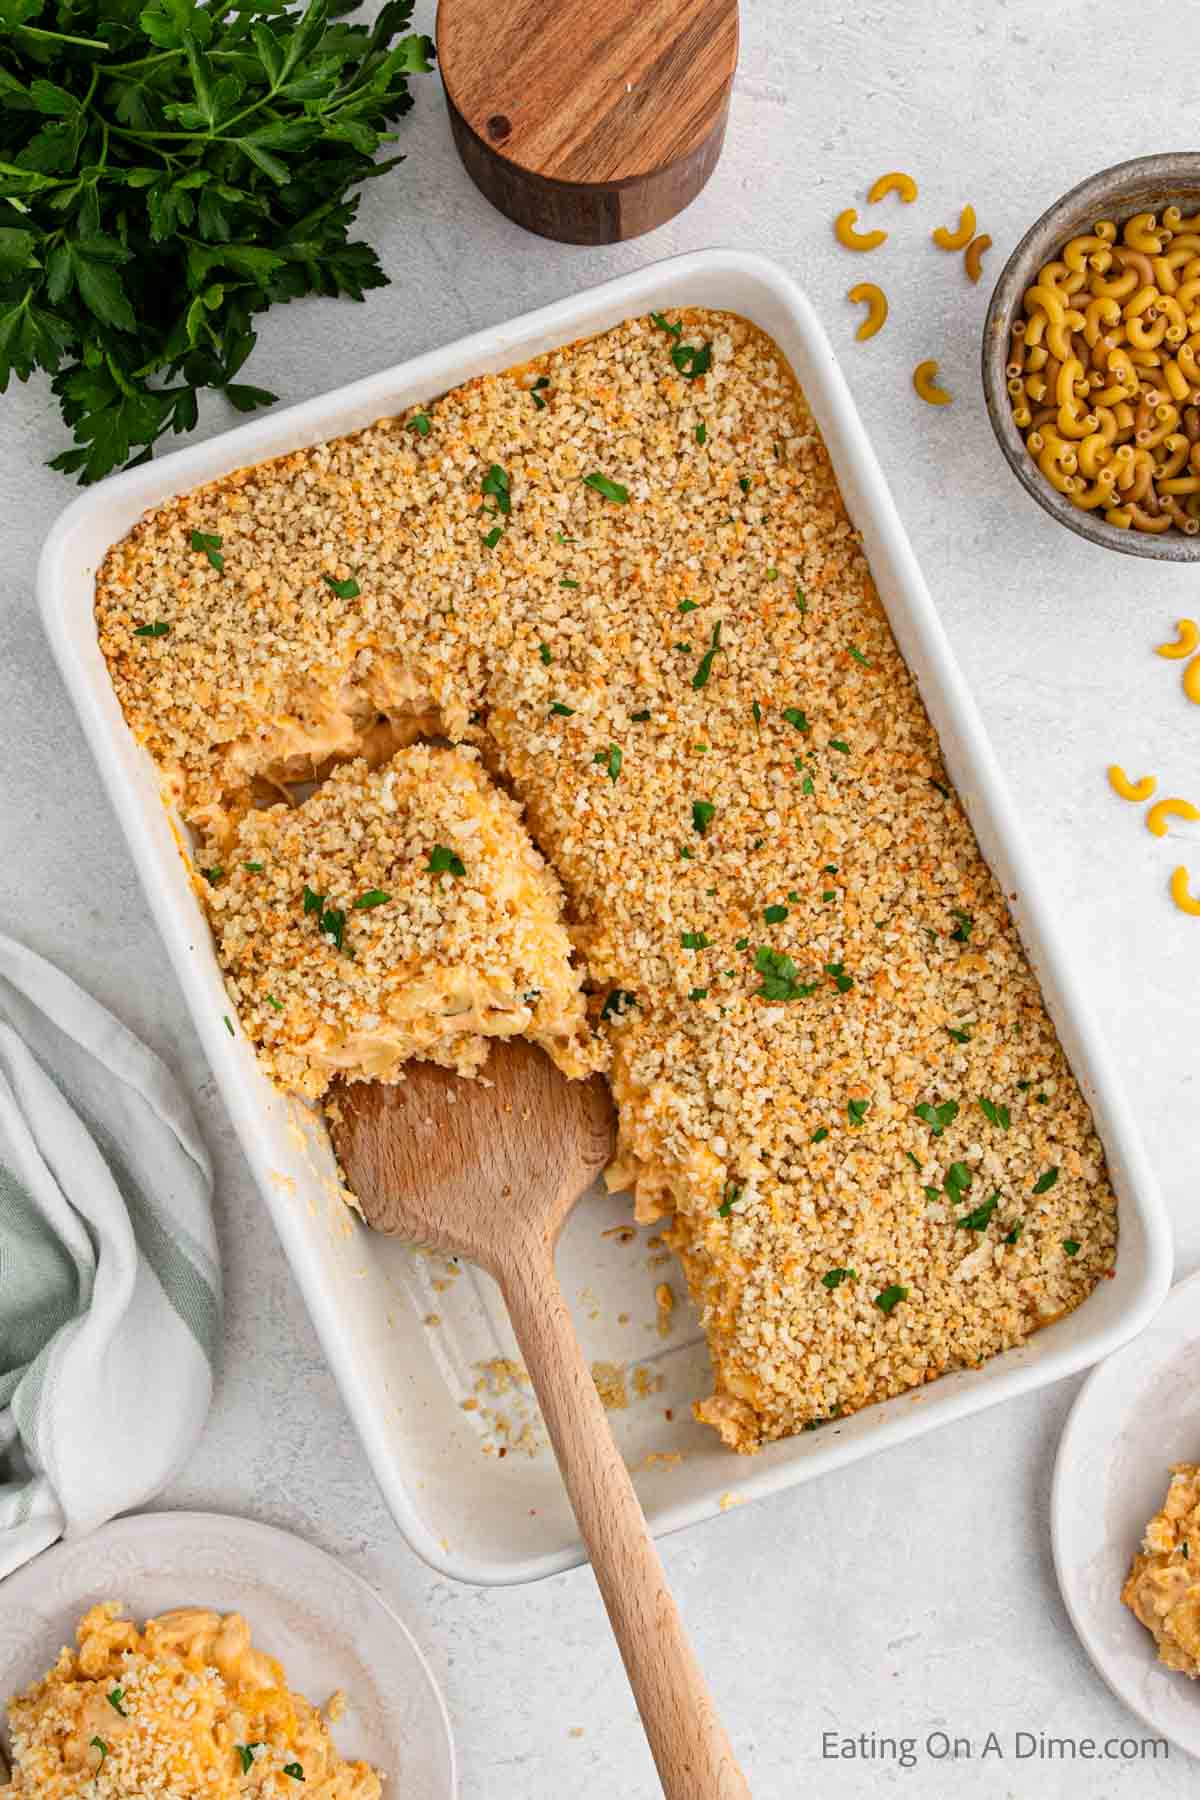 Baked Mac and Cheese in a casserole dish with a wooden spatula